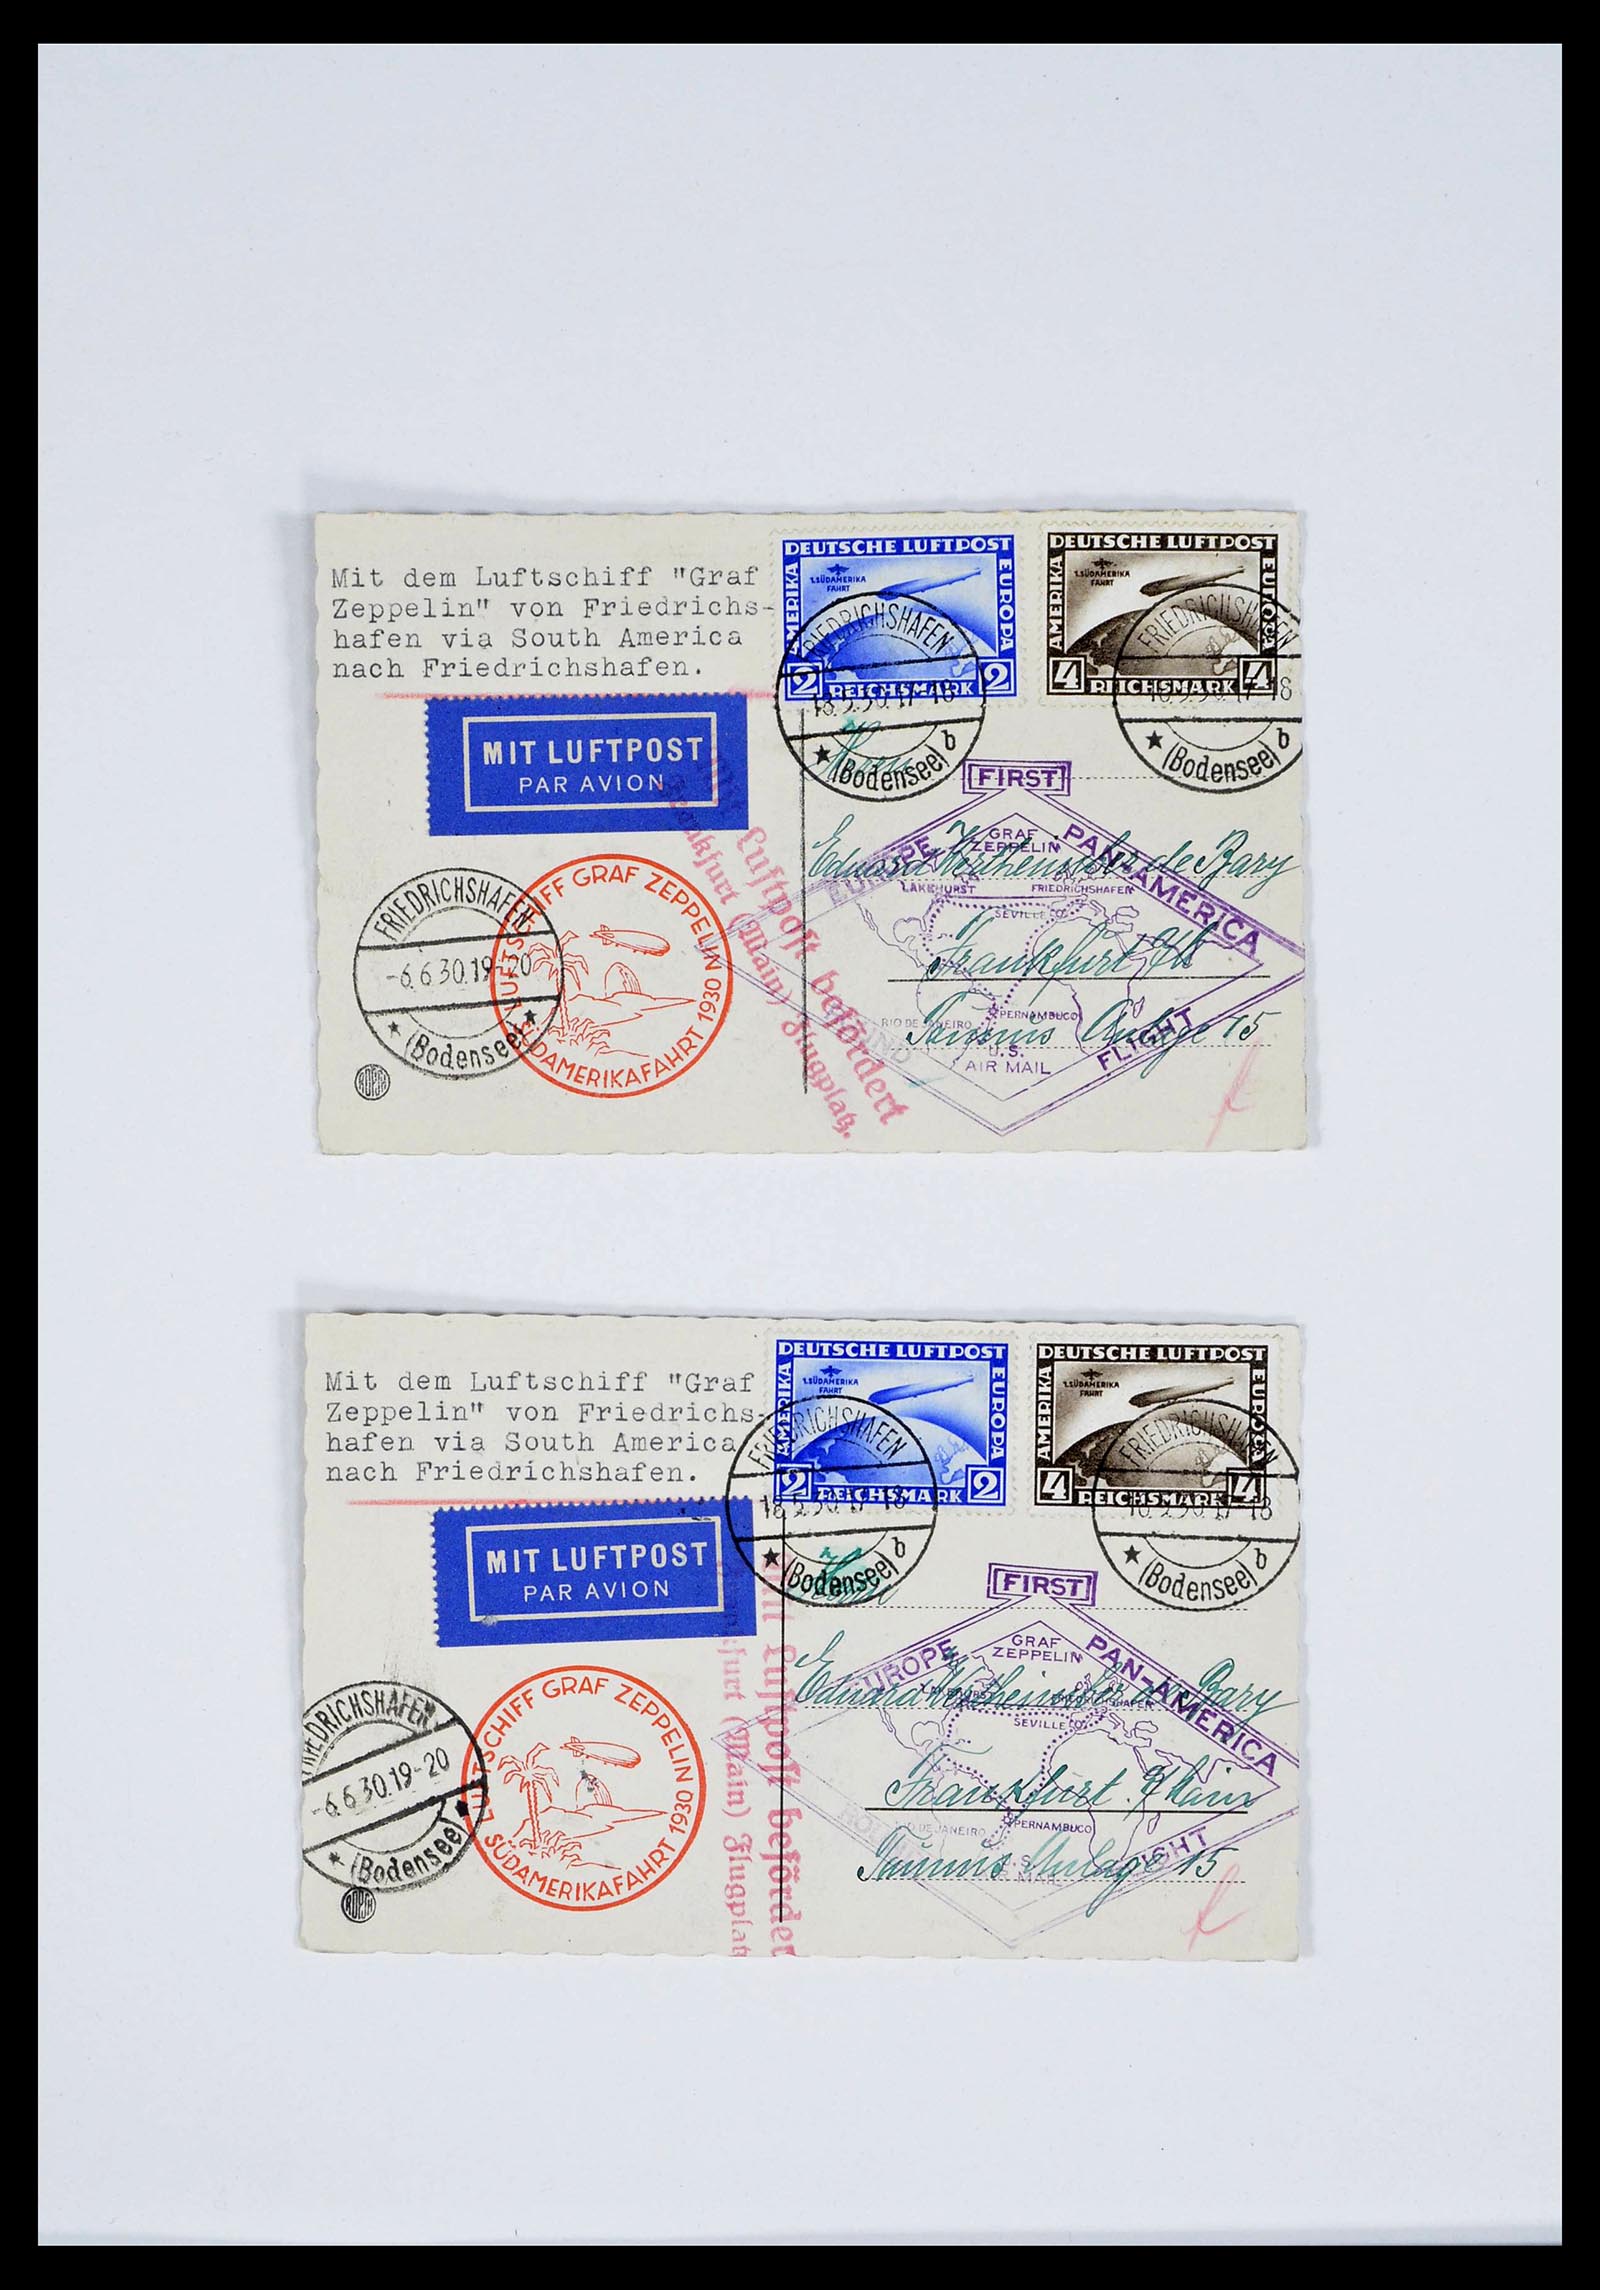 39032 0020 - Stamp collection 39032 Zeppelin covers 1928-1933.